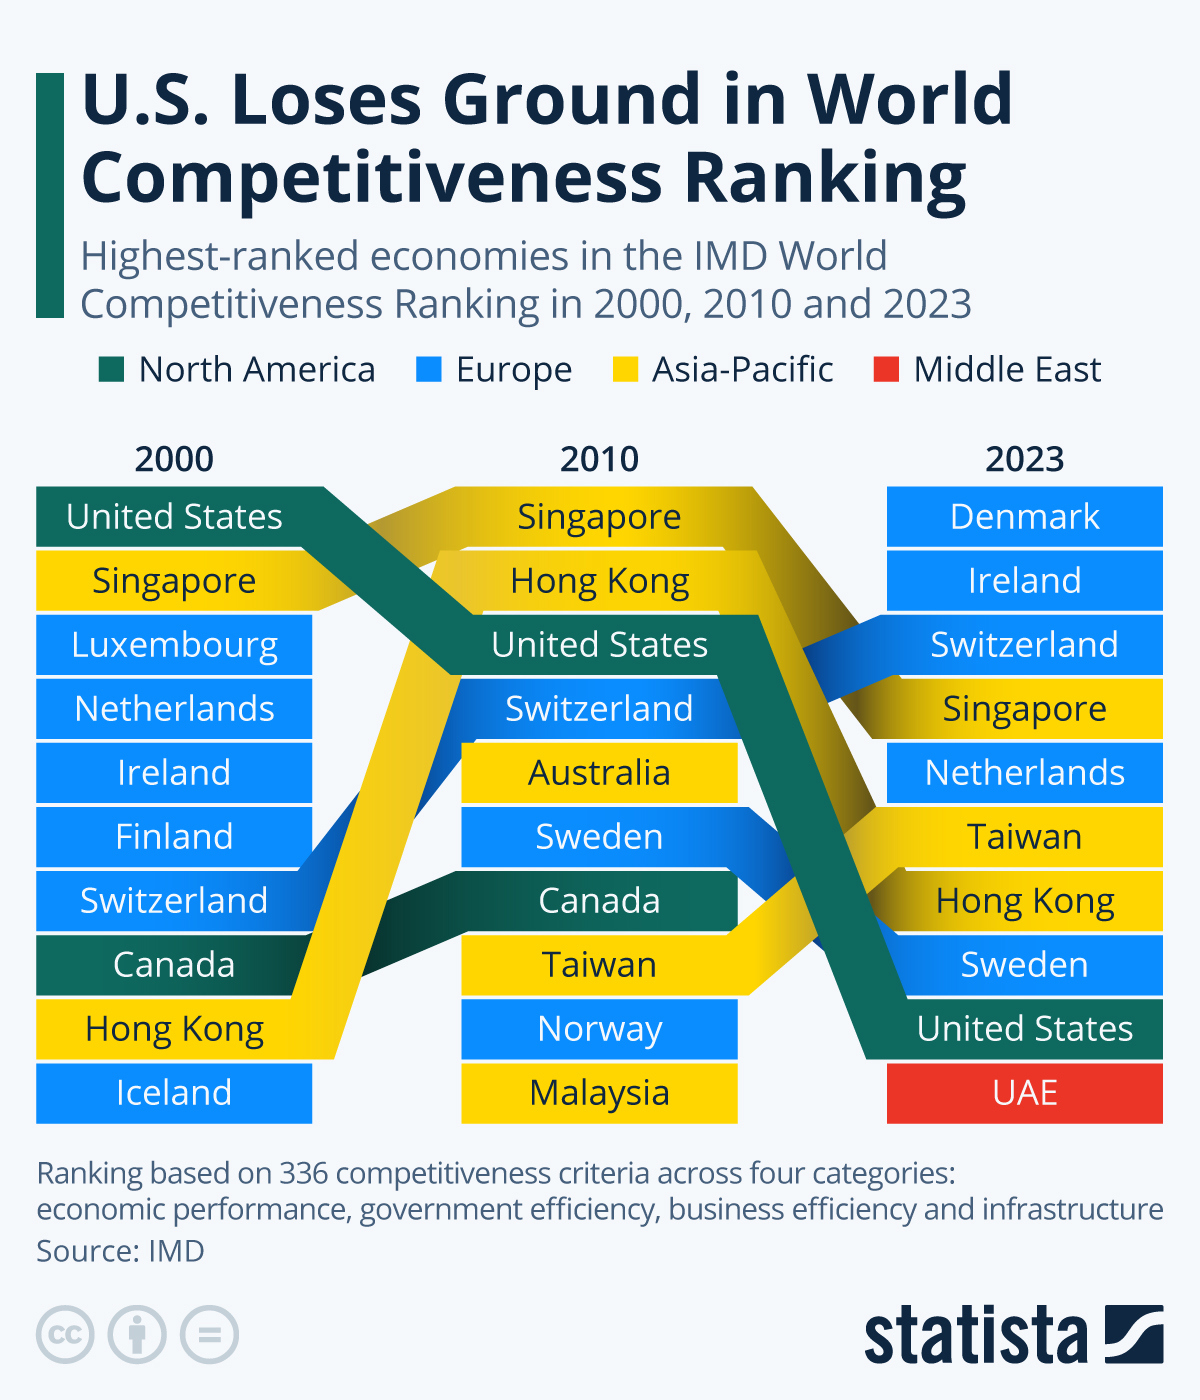 U.S. Loses Ground in World Competitiveness Ranking